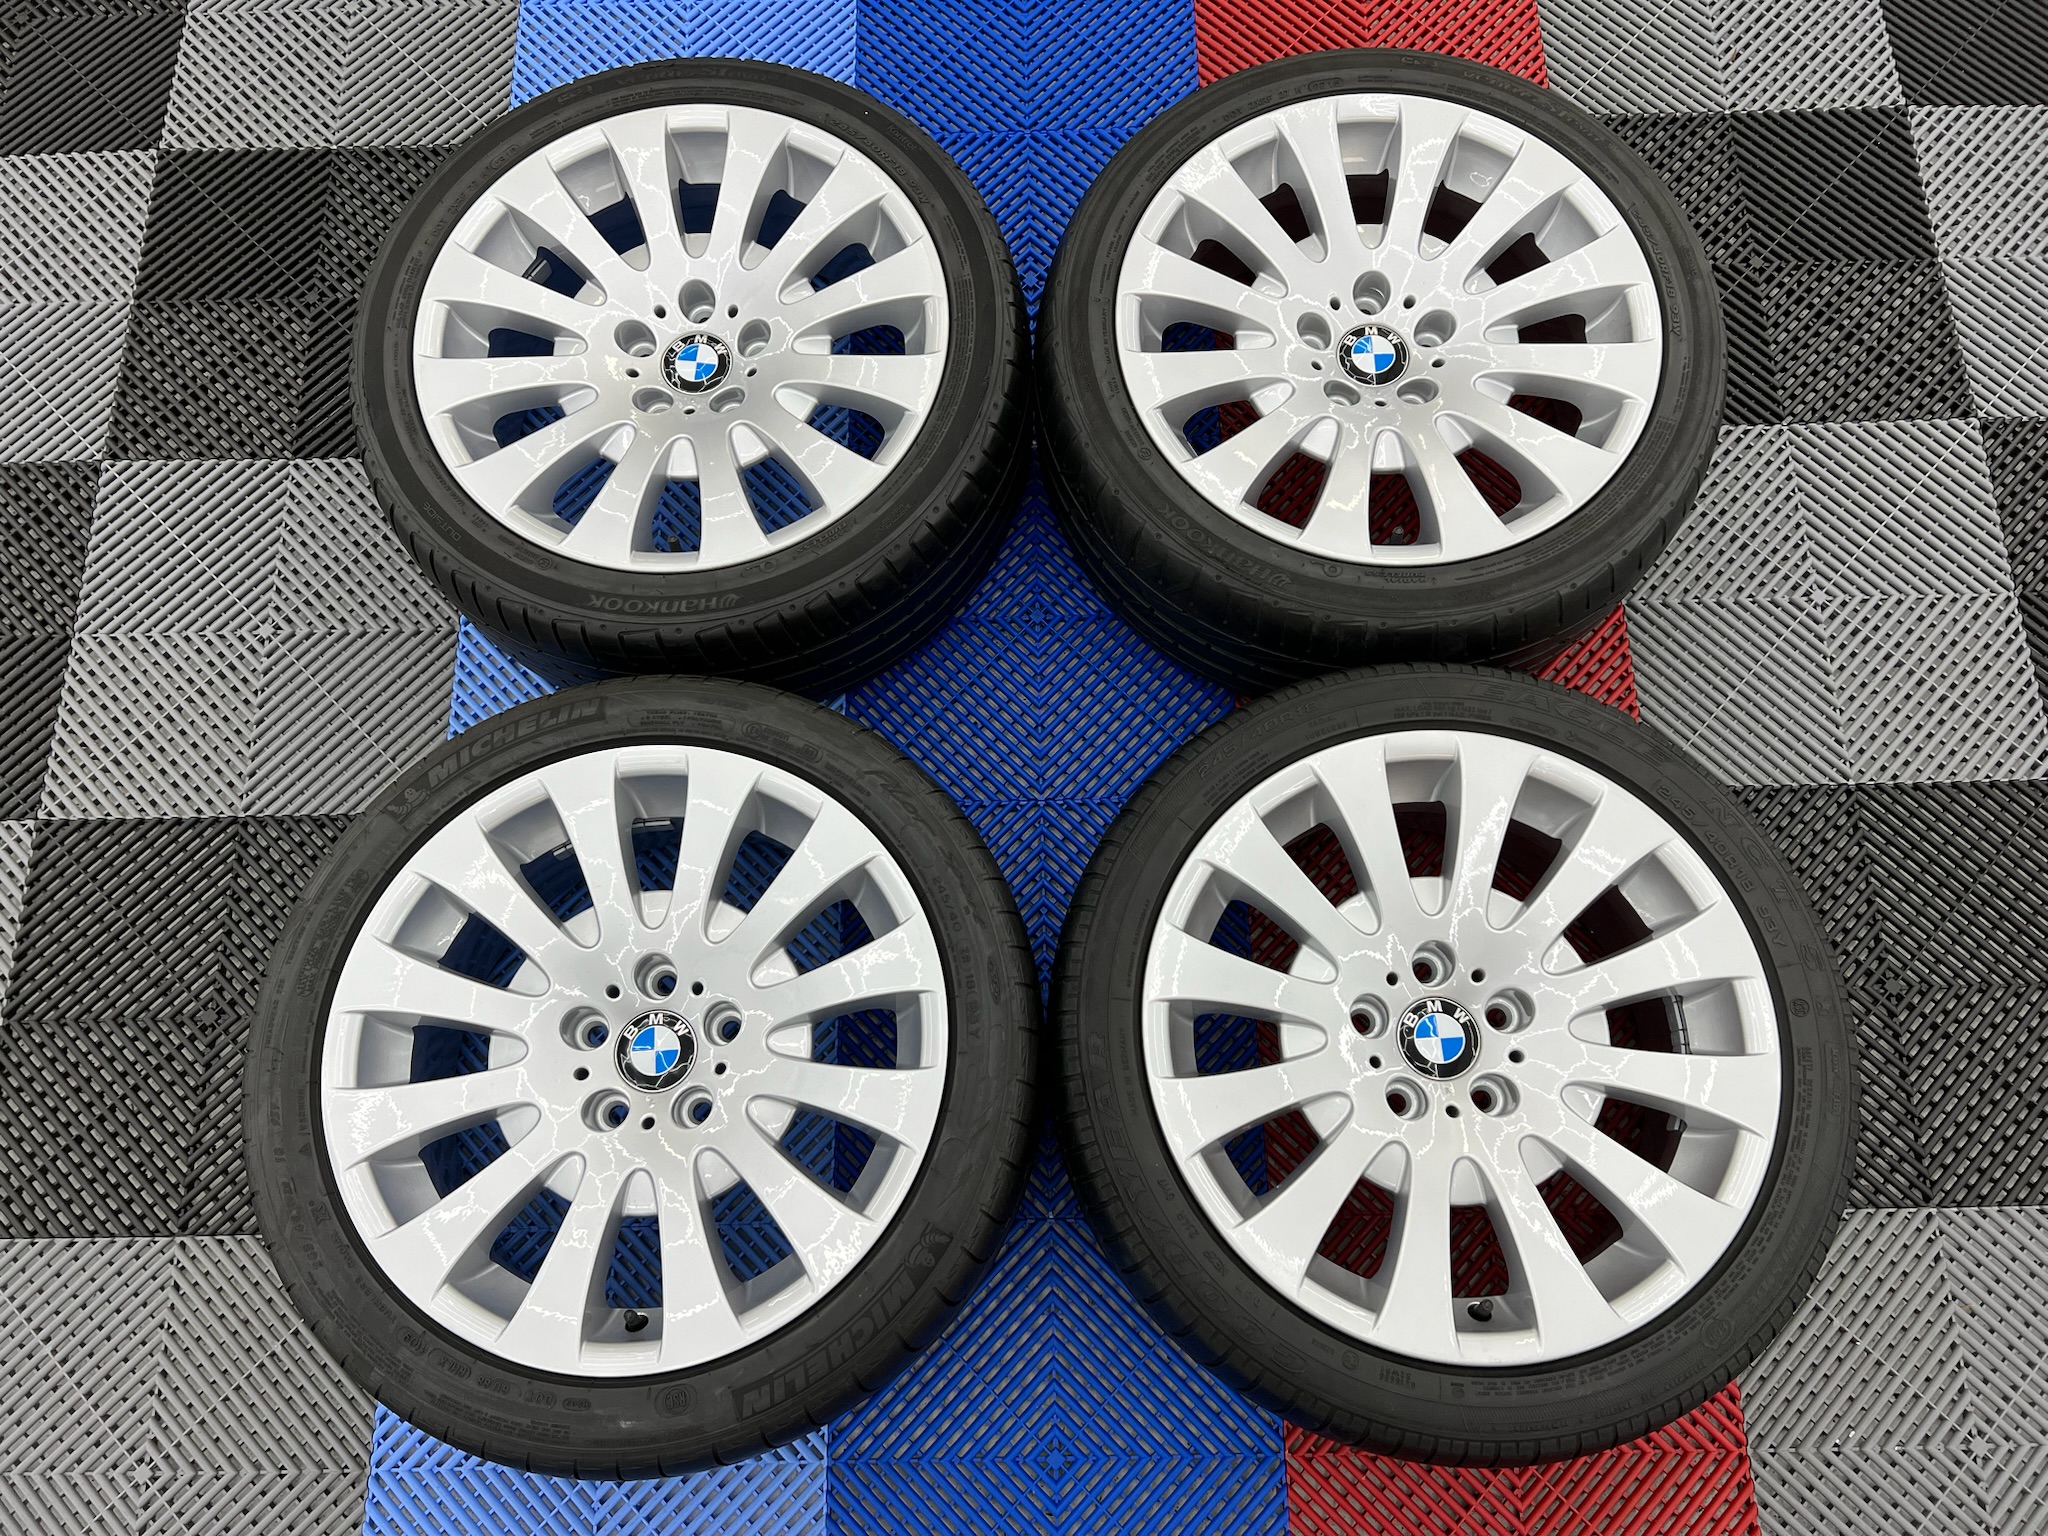 USED 18" GENUINE BMW STYLE 118 ALLOY WHEELS, FULLY REFURBED INC RUNFLAT TYRES